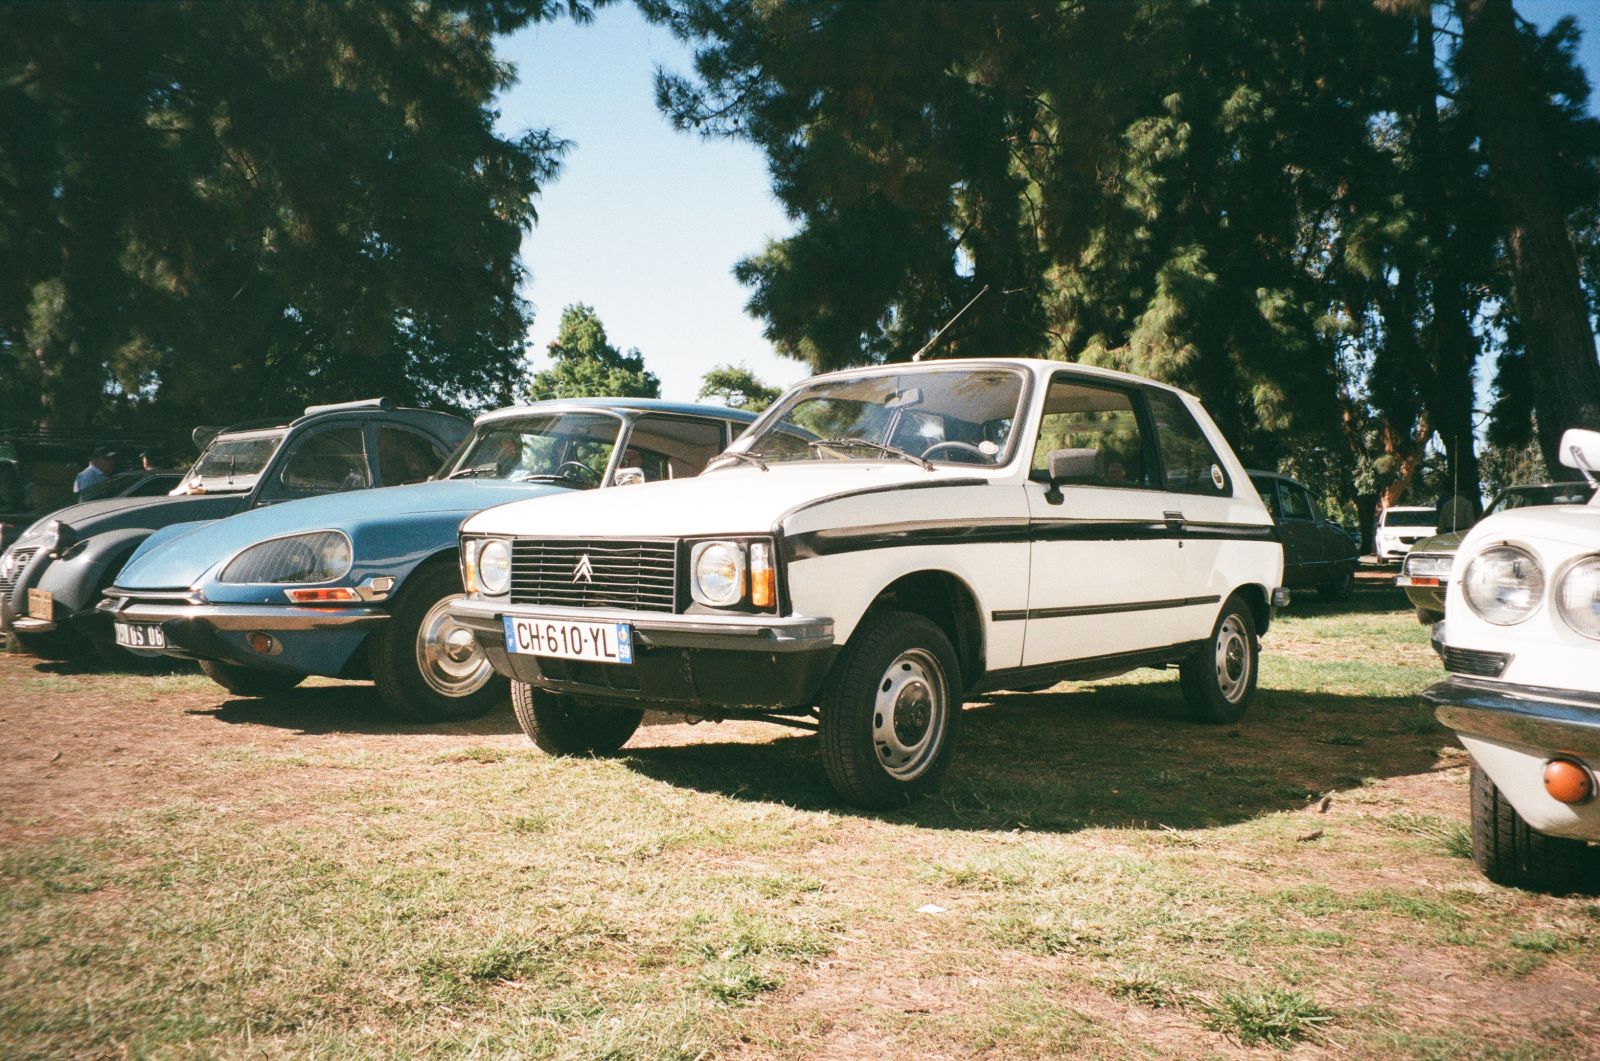 My Citroën LNA holding its own while flanked by goddesses.